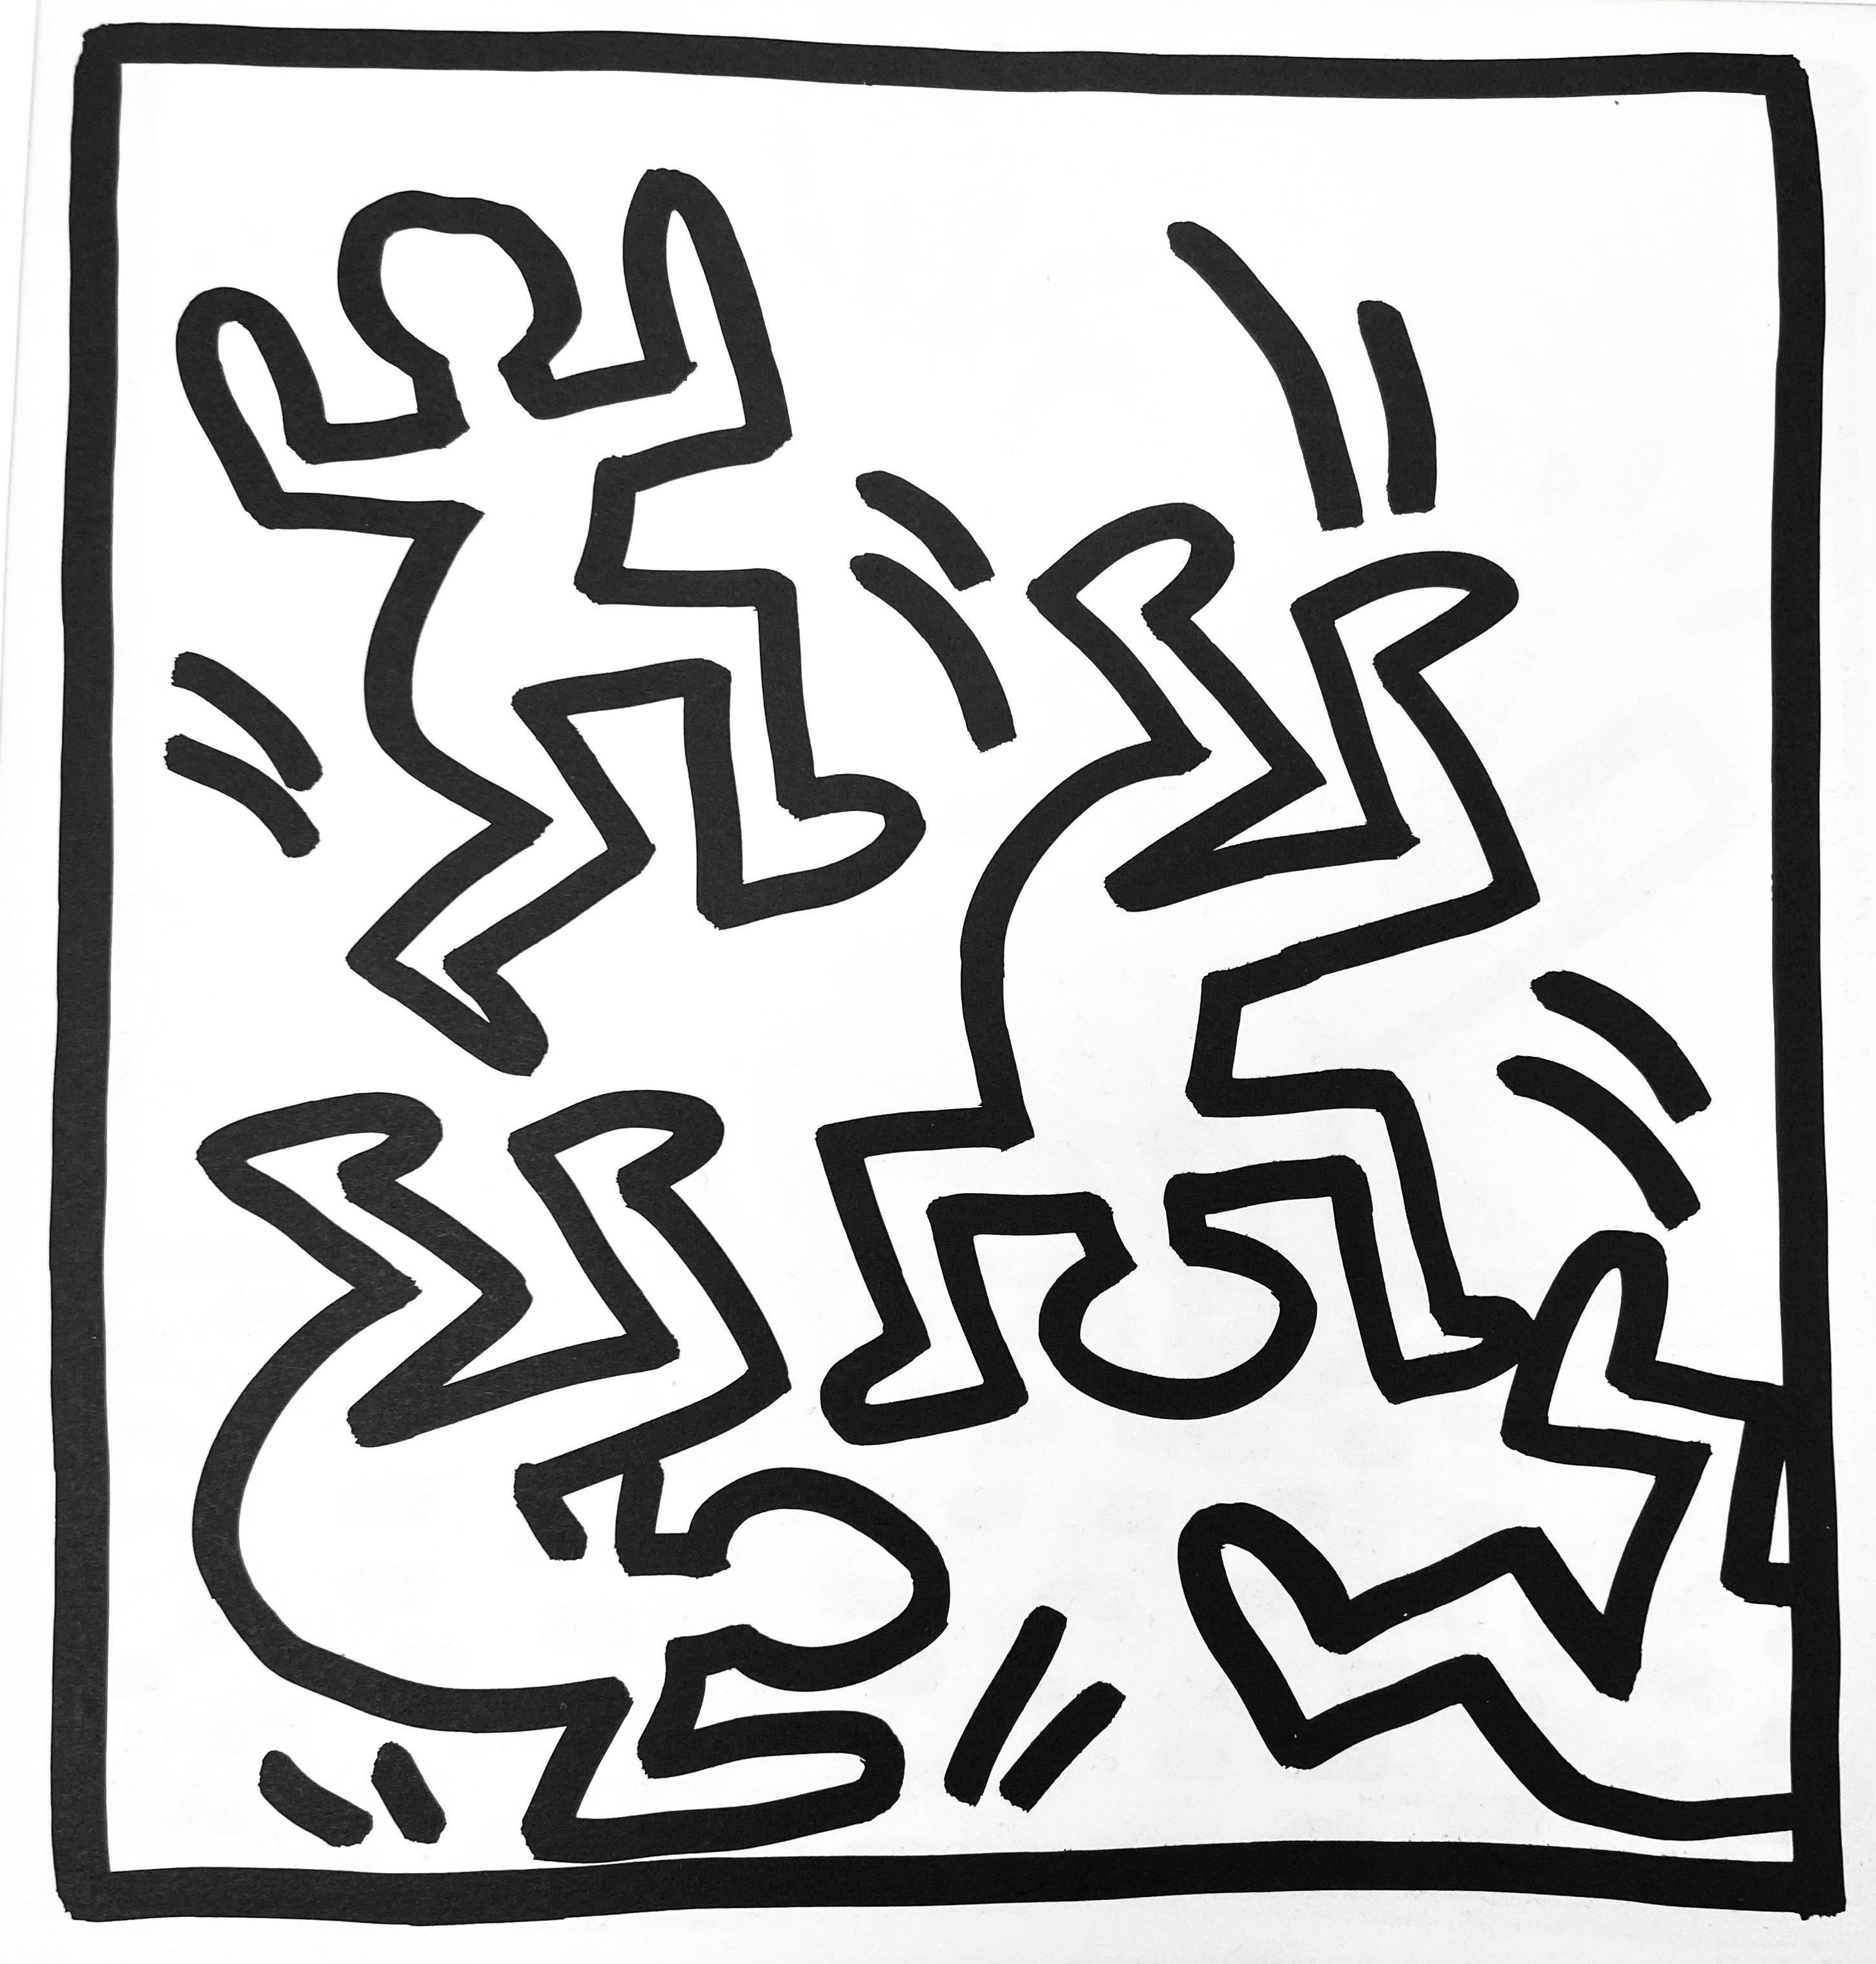 (after) Keith Haring Animal Print - Keith Haring (untitled) dancing figures lithograph 1982 (Keith Haring prints)